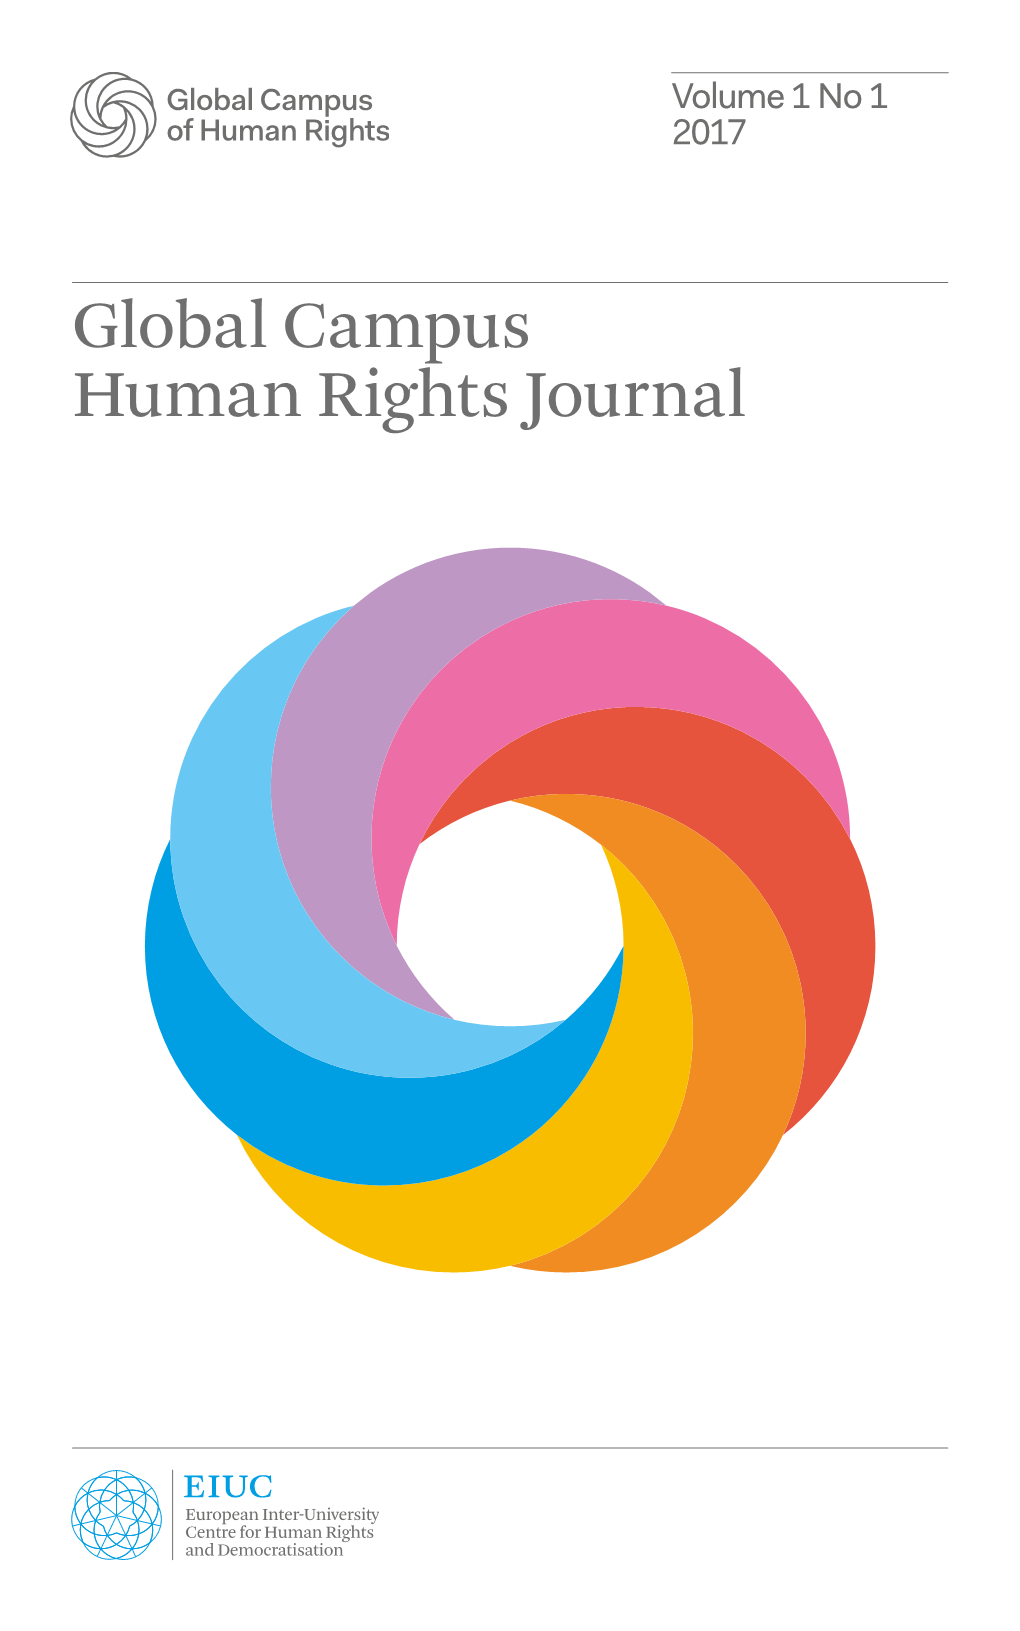 Global Campus Human Rights Journal 2017 1.Pdf (1.865Mb)